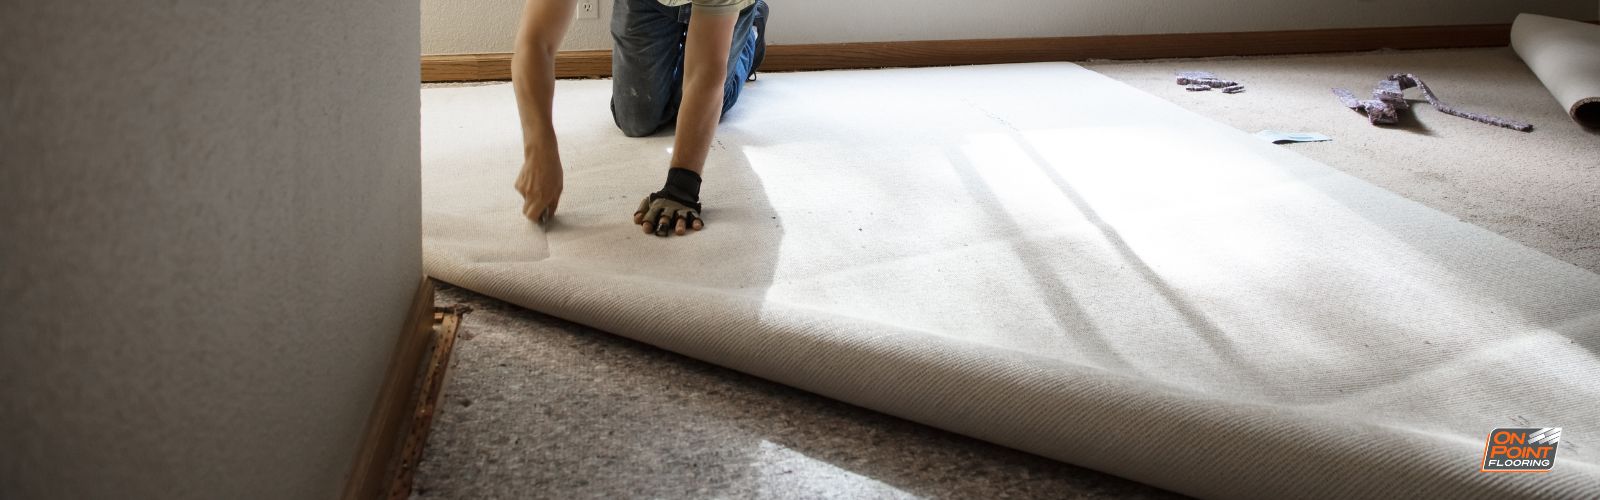 Simple Tips to Reduce Clutter For Carpet Installation